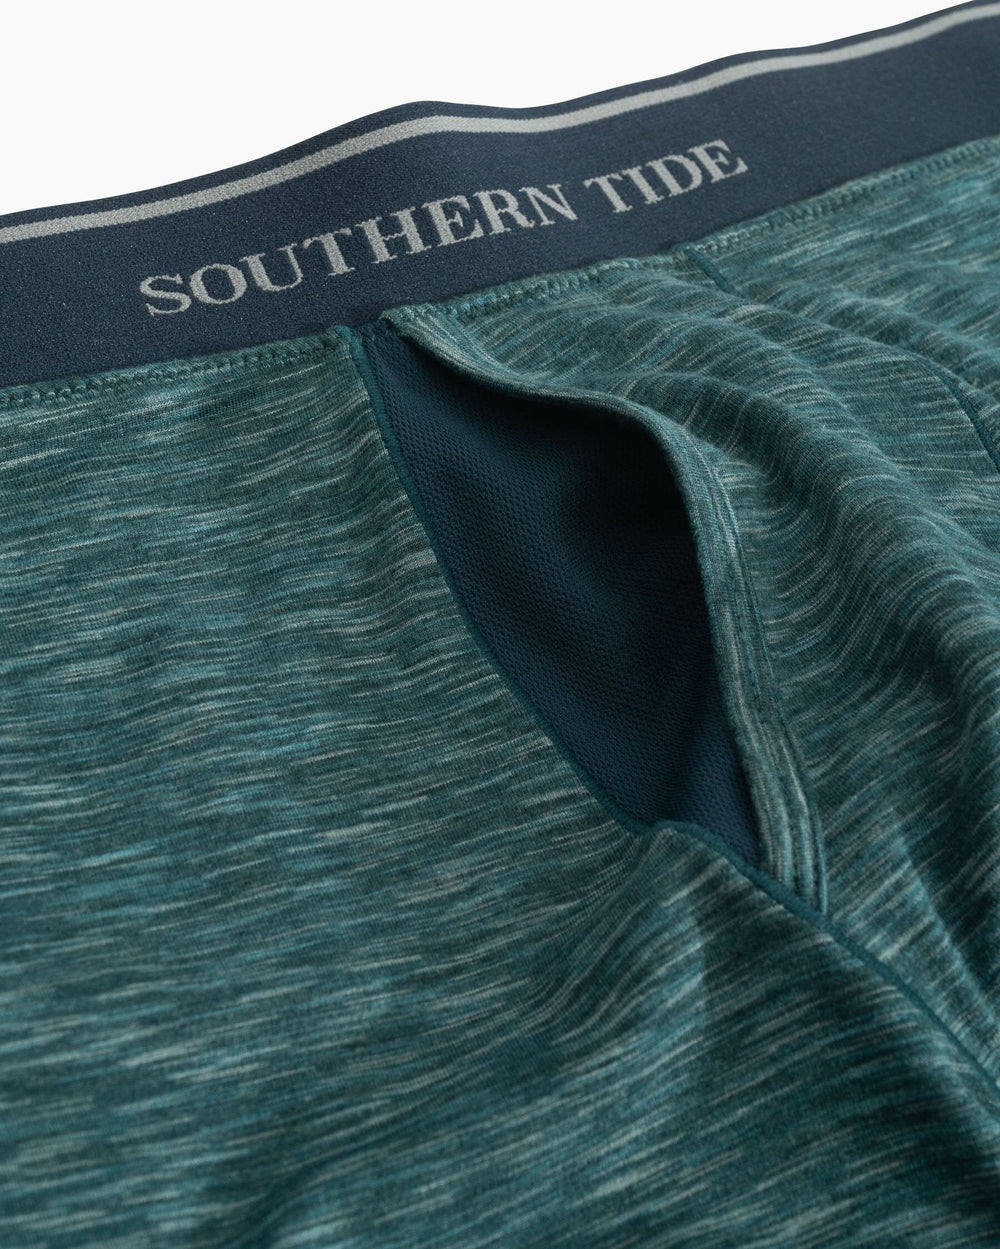 The detail of the Men's Baxter Boxer Brief by Southern Tide - Green Gables